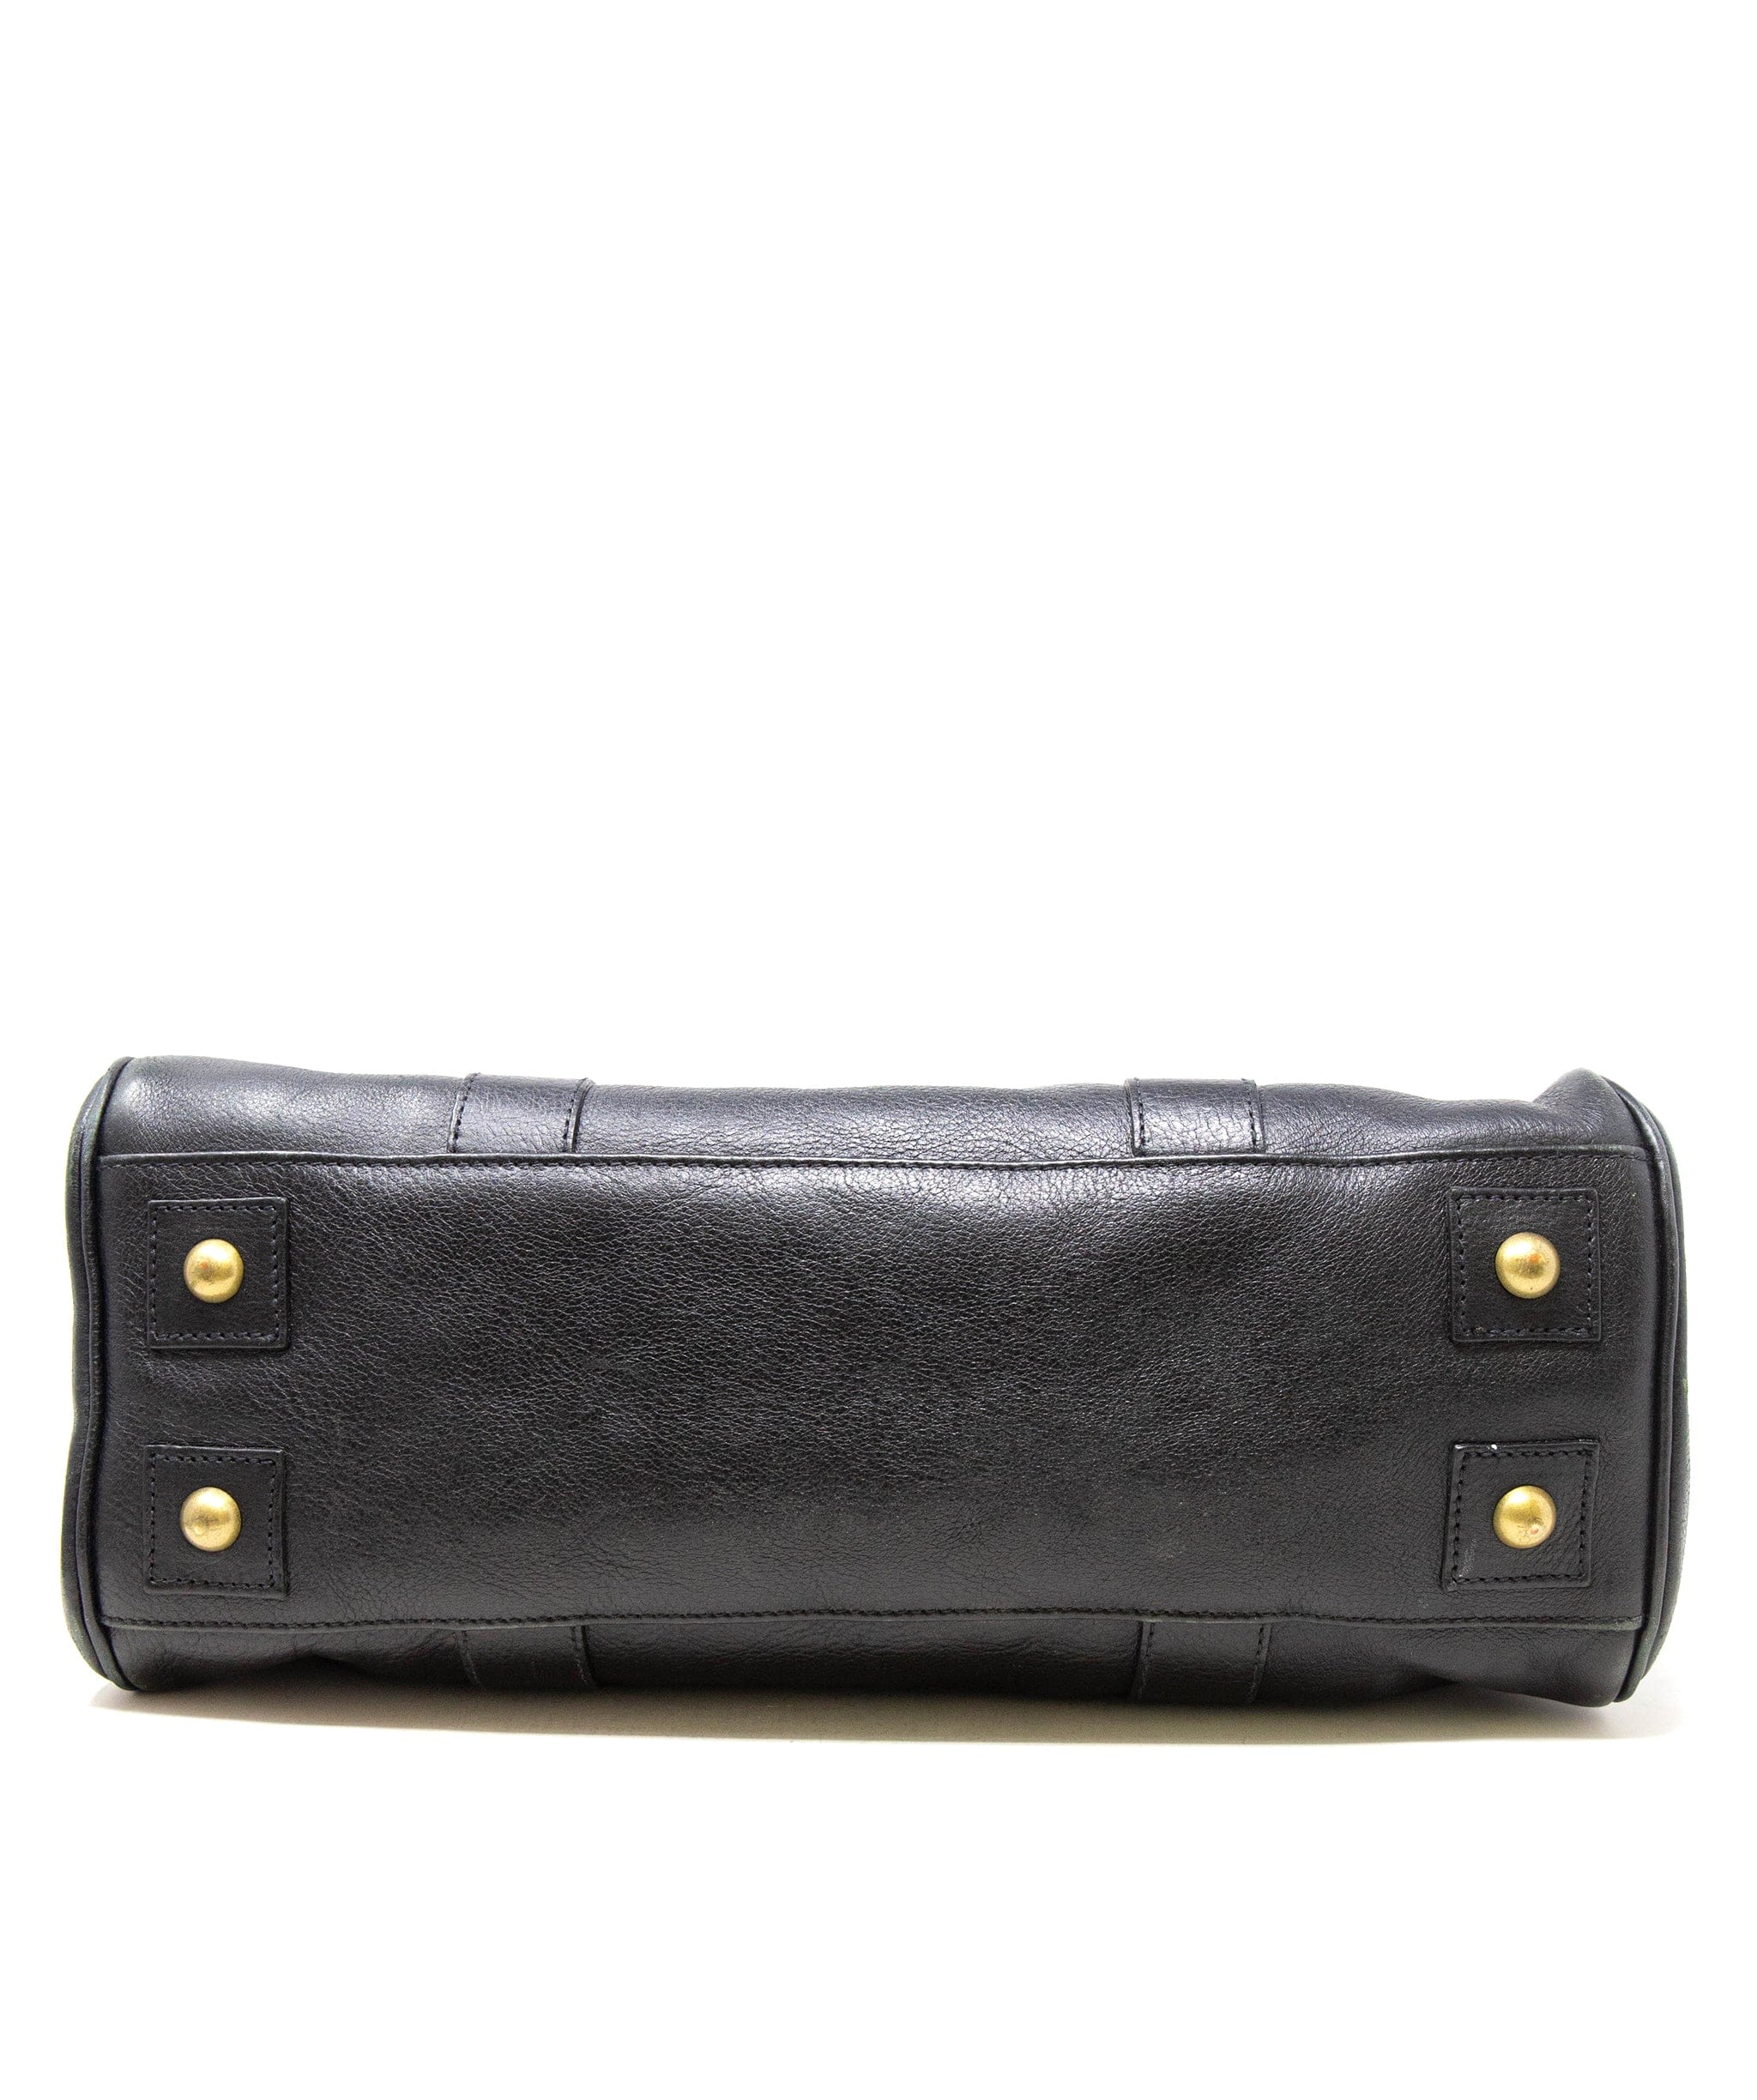 Mulberry Mulberry bayswater bag black - AGL1926